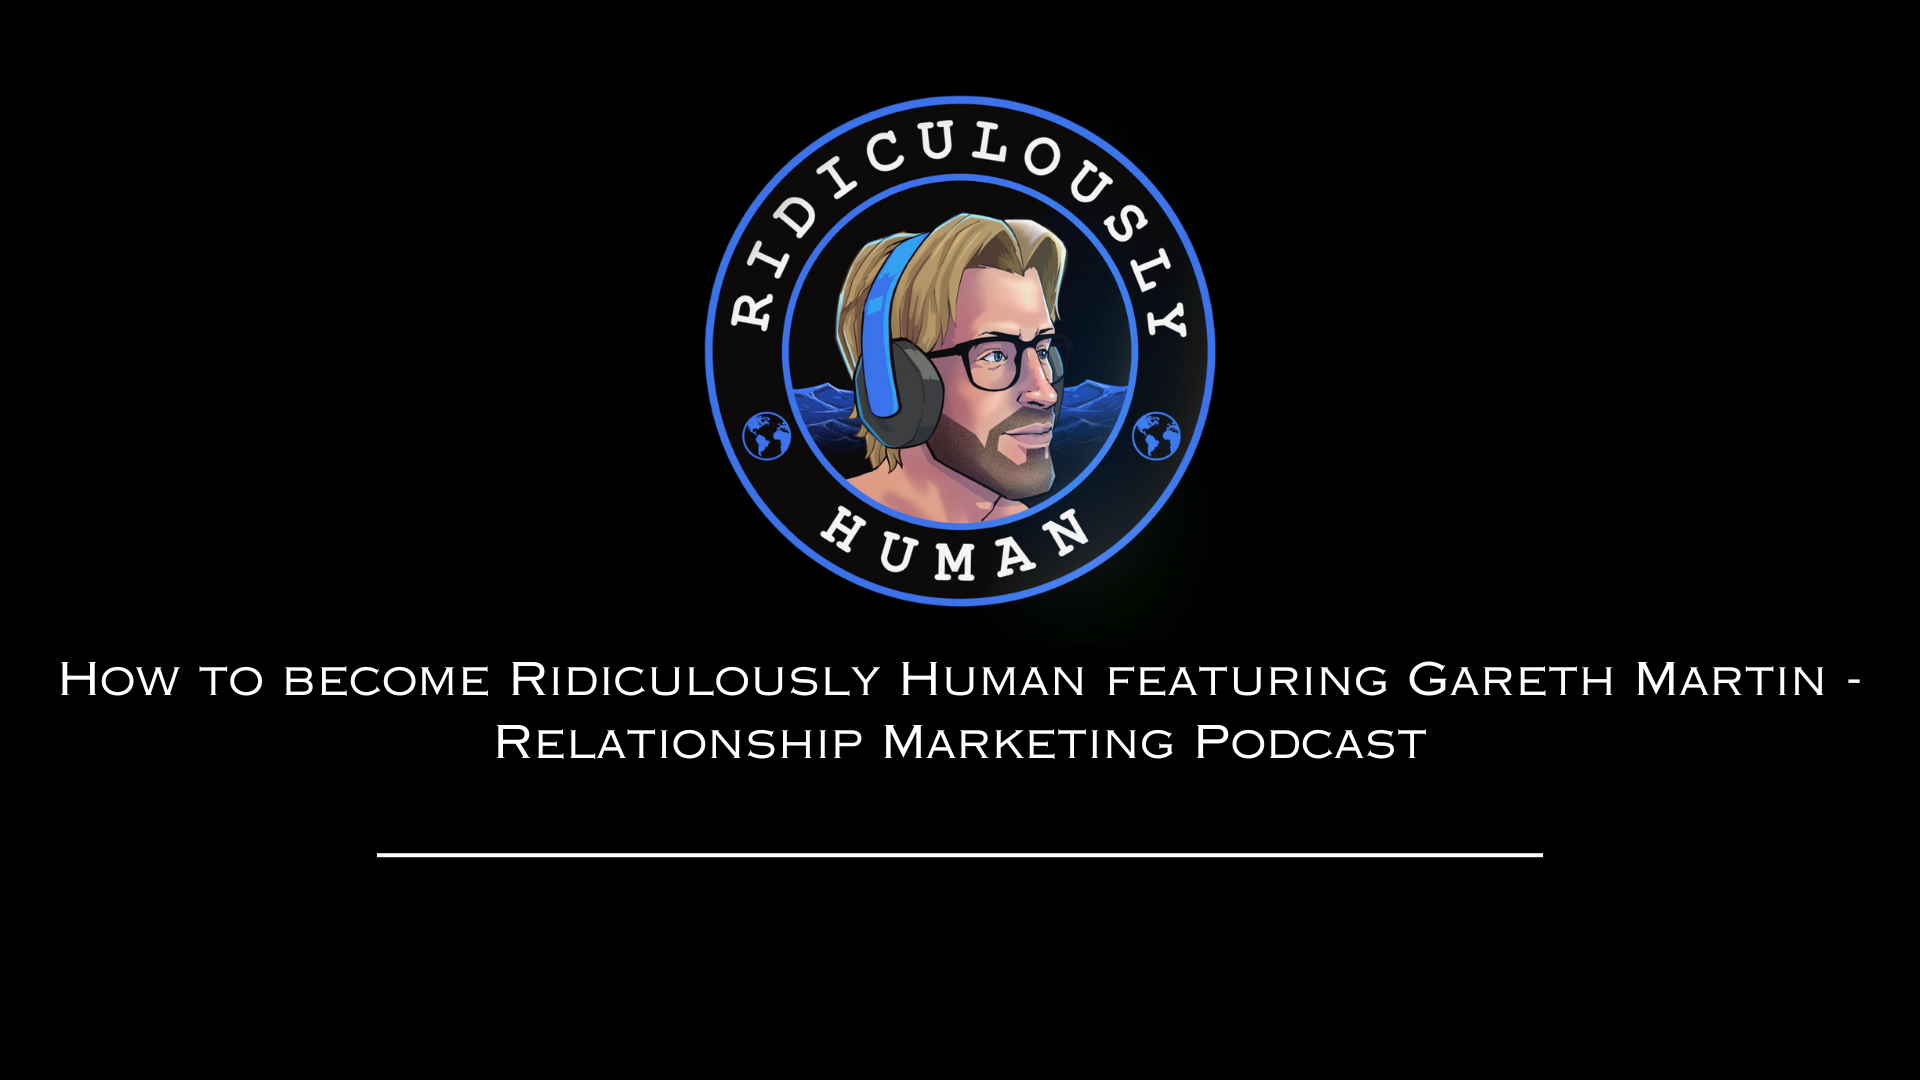 How to become Ridiculously Human featuring Gareth Martin - Relationship Marketing Podcast